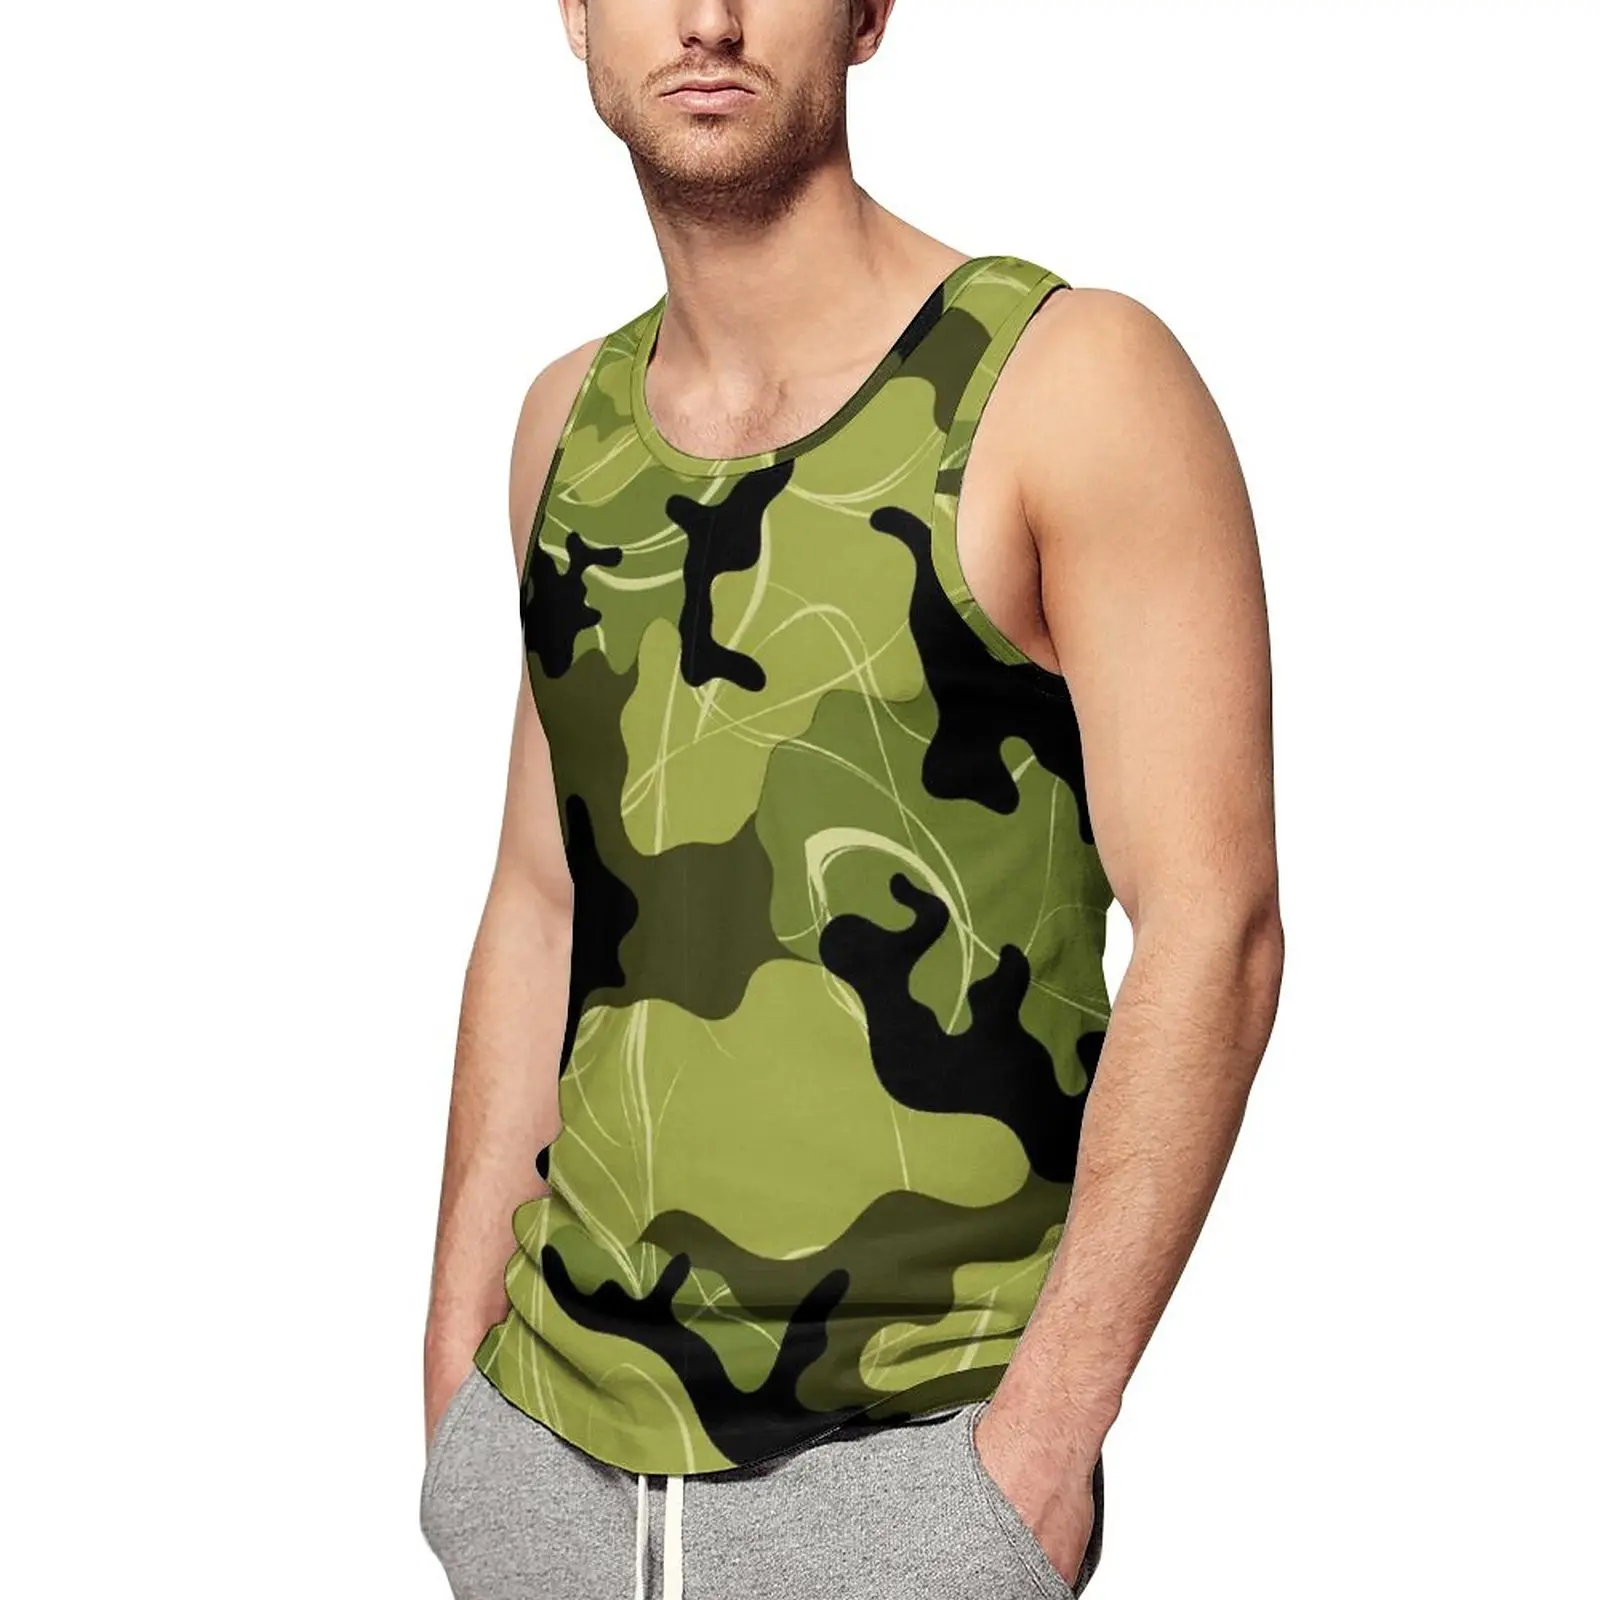 

Colorful Camo Tank Top Cool Hunter Camouflage Sportswear Tops Summer Workout Mens Custom Sleeveless Vests Big Size